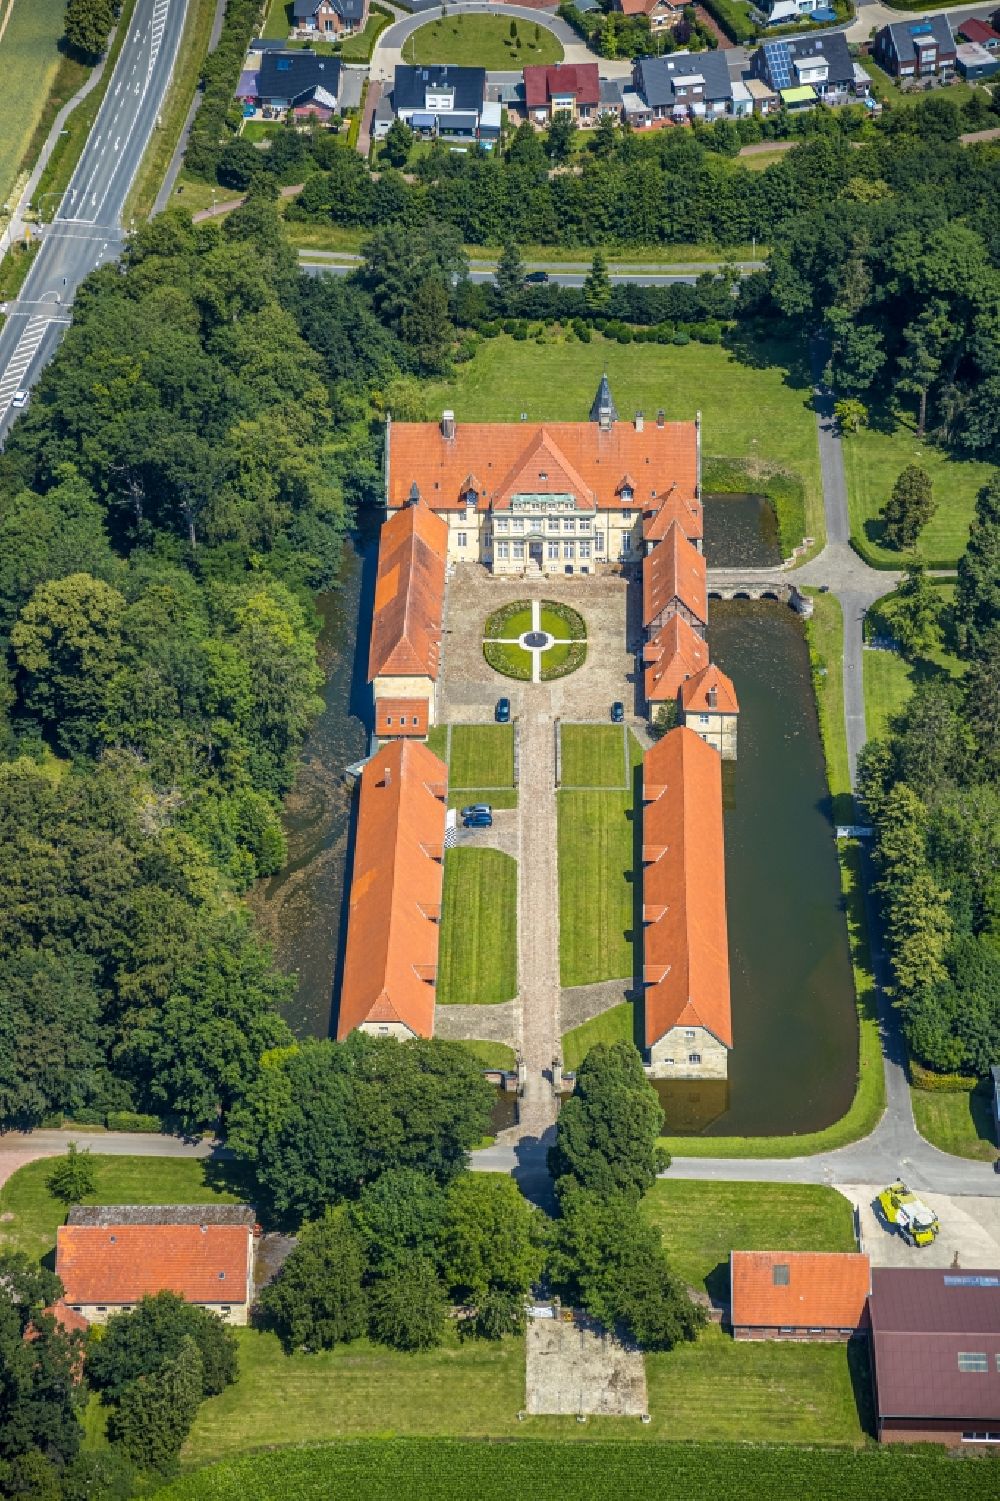 Havixbeck from the bird's eye view: Palace on Josef-Heydt-Strasse in the district Lasbeck in Havixbeck in the state North Rhine-Westphalia, Germany